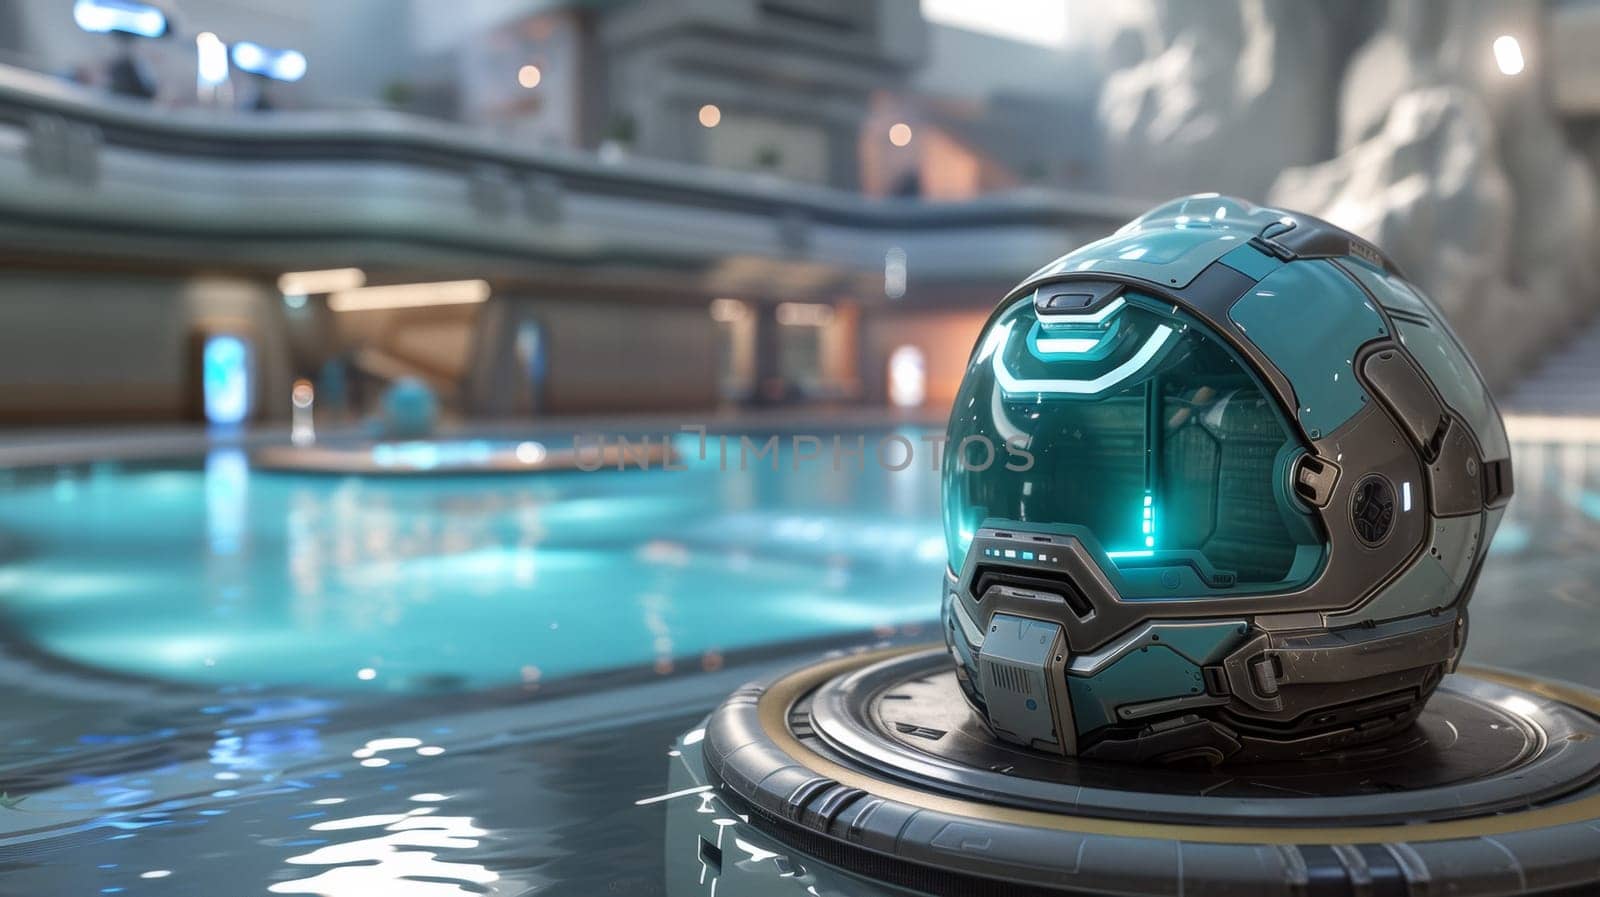 A helmet on a table in front of an indoor pool